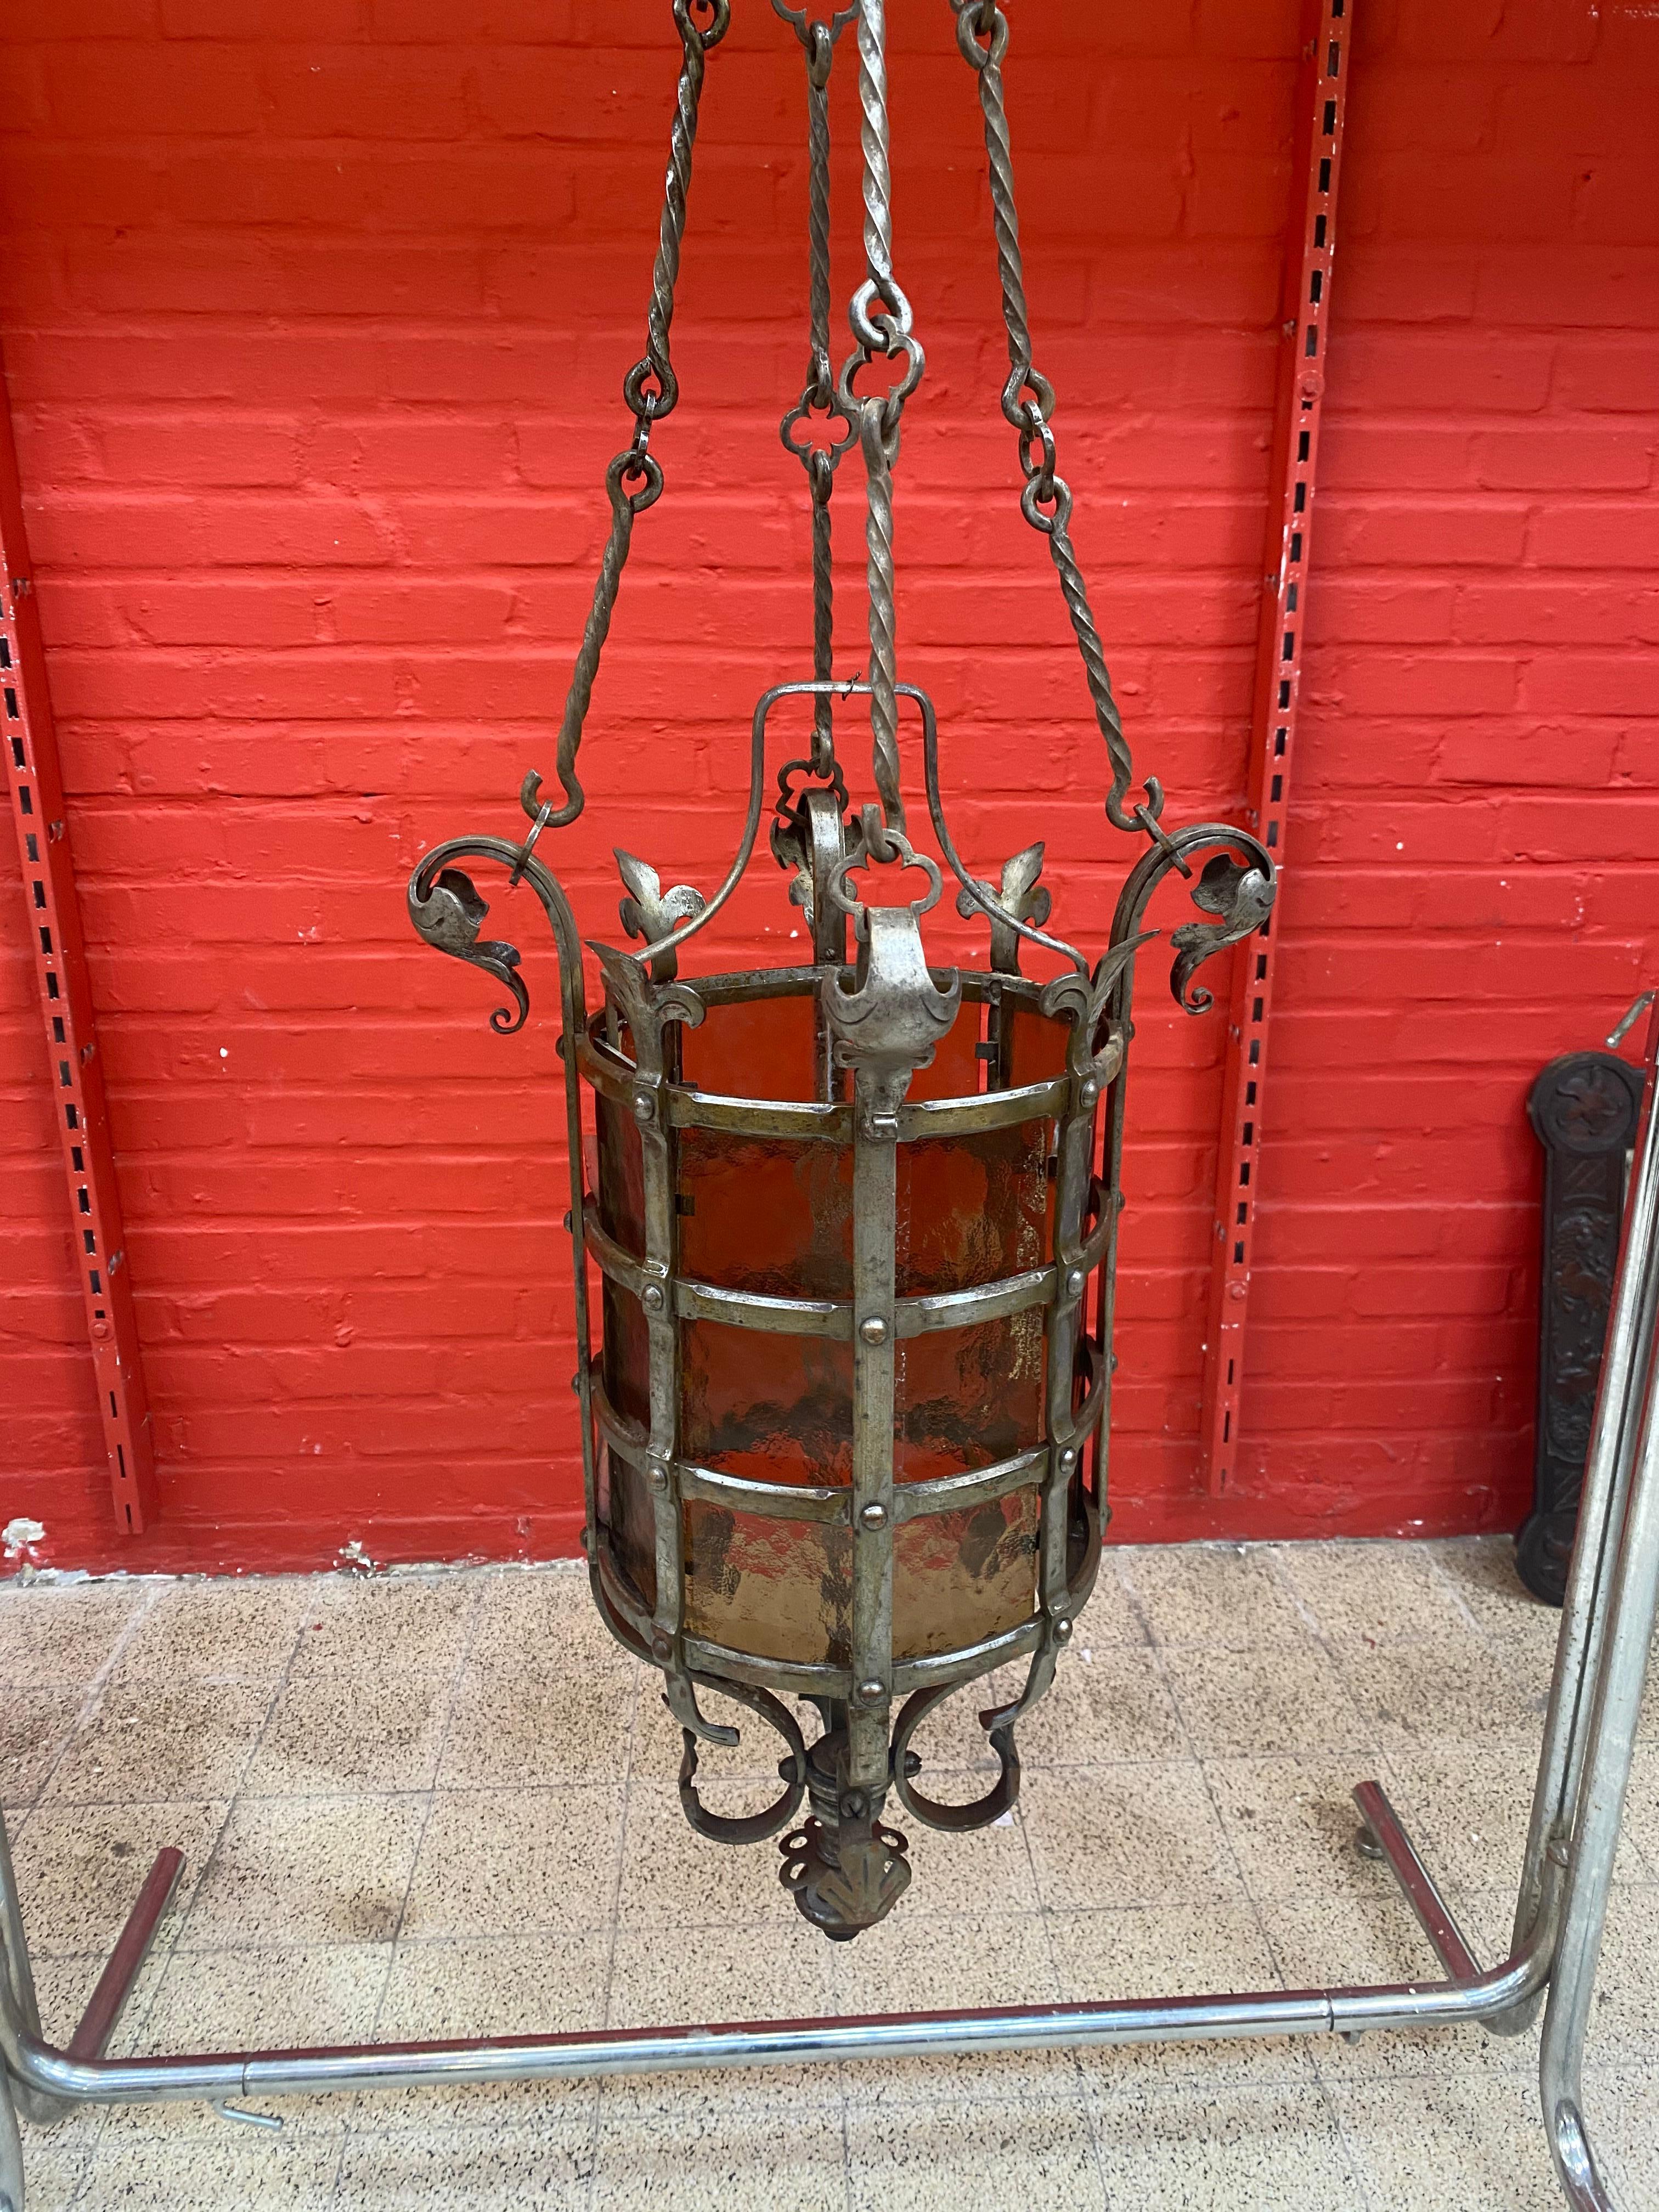 Exceptional wrought iron castle lantern circa 1930
Very nice work of ironwork and bolts
Provenance chateau in the center of France.